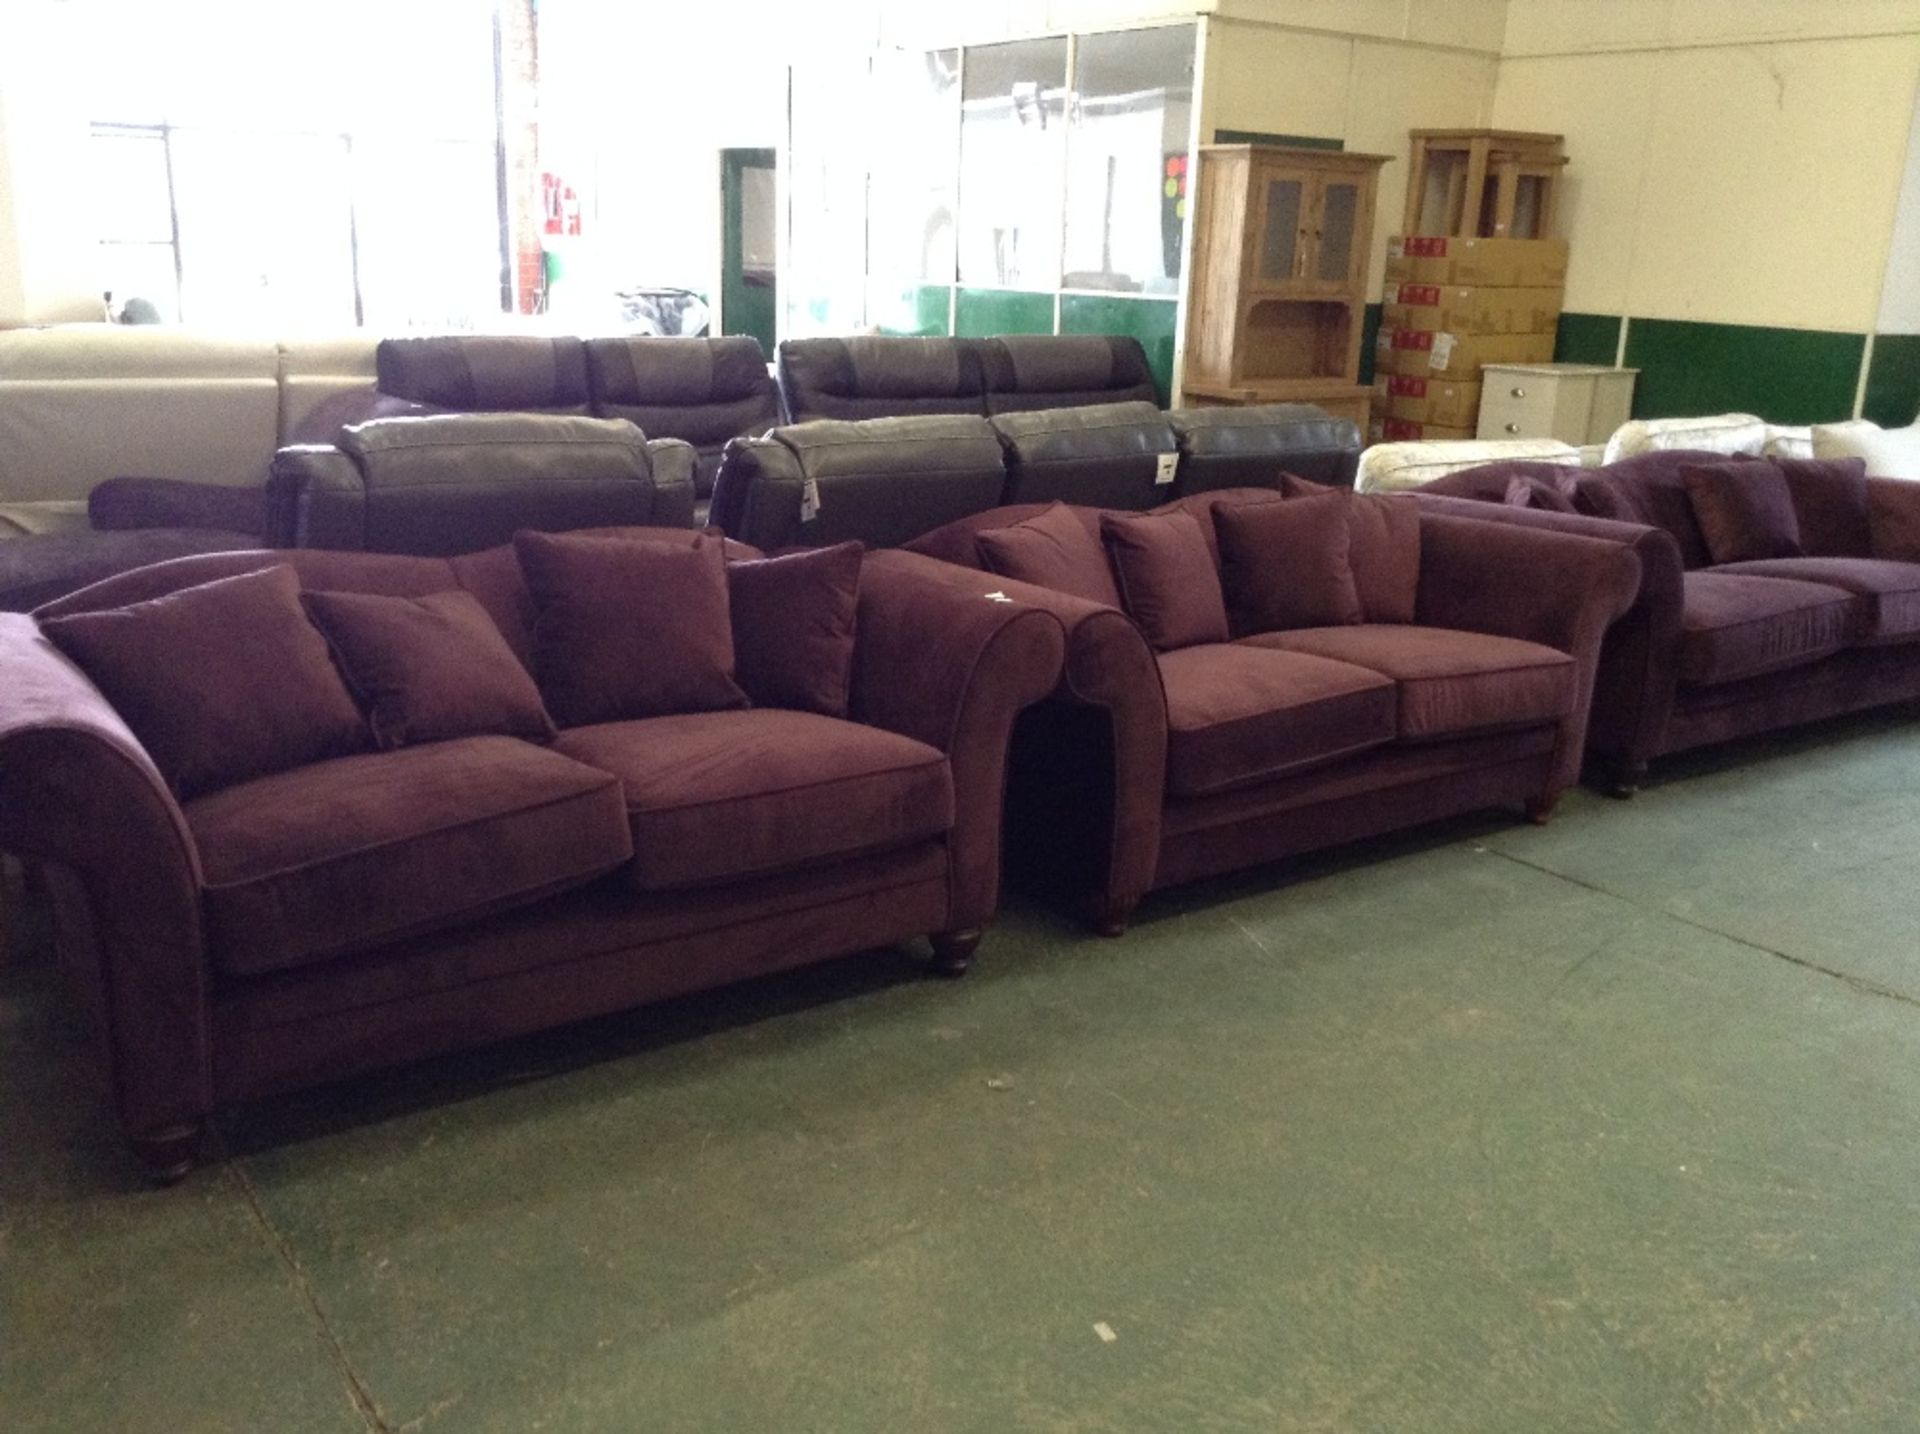 WINSLOW LUXOR GRAPE 3 SEATER SOFA AND 2 x 2 SEATER